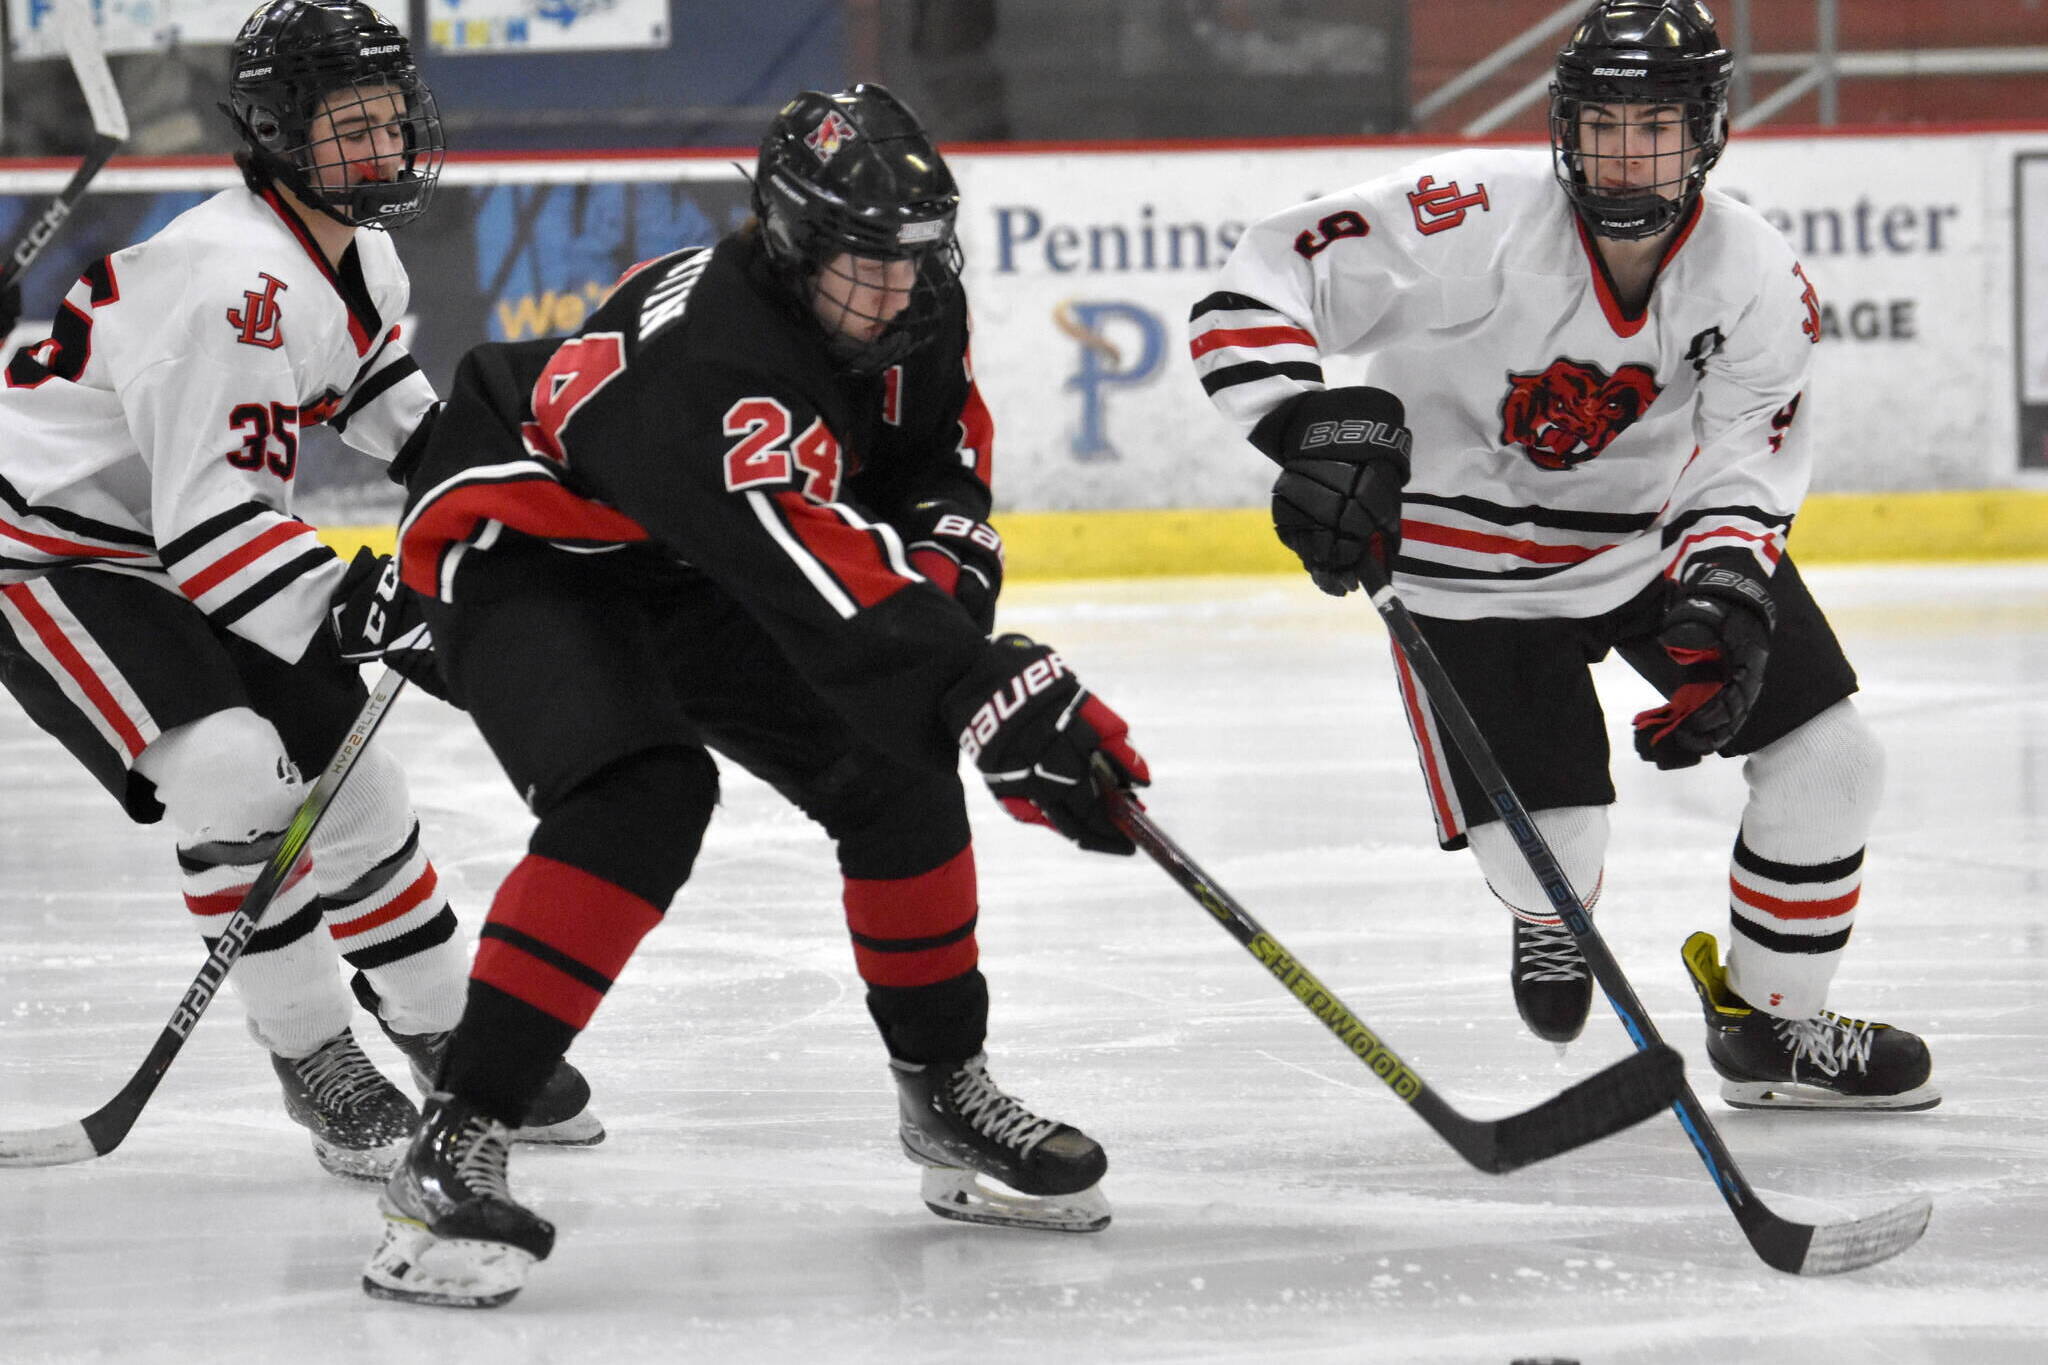 Kenai Central’s Avery Martin tries to split Juneau-Douglas High School: Yadaa.at Kale’s Dylan Sowa and Camden Kovach on Thursday at the Division II state hockey tournament at the Soldotna Regional Sports Complex in Soldotna. (Jeff Helminiak/Peninsula Clarion)